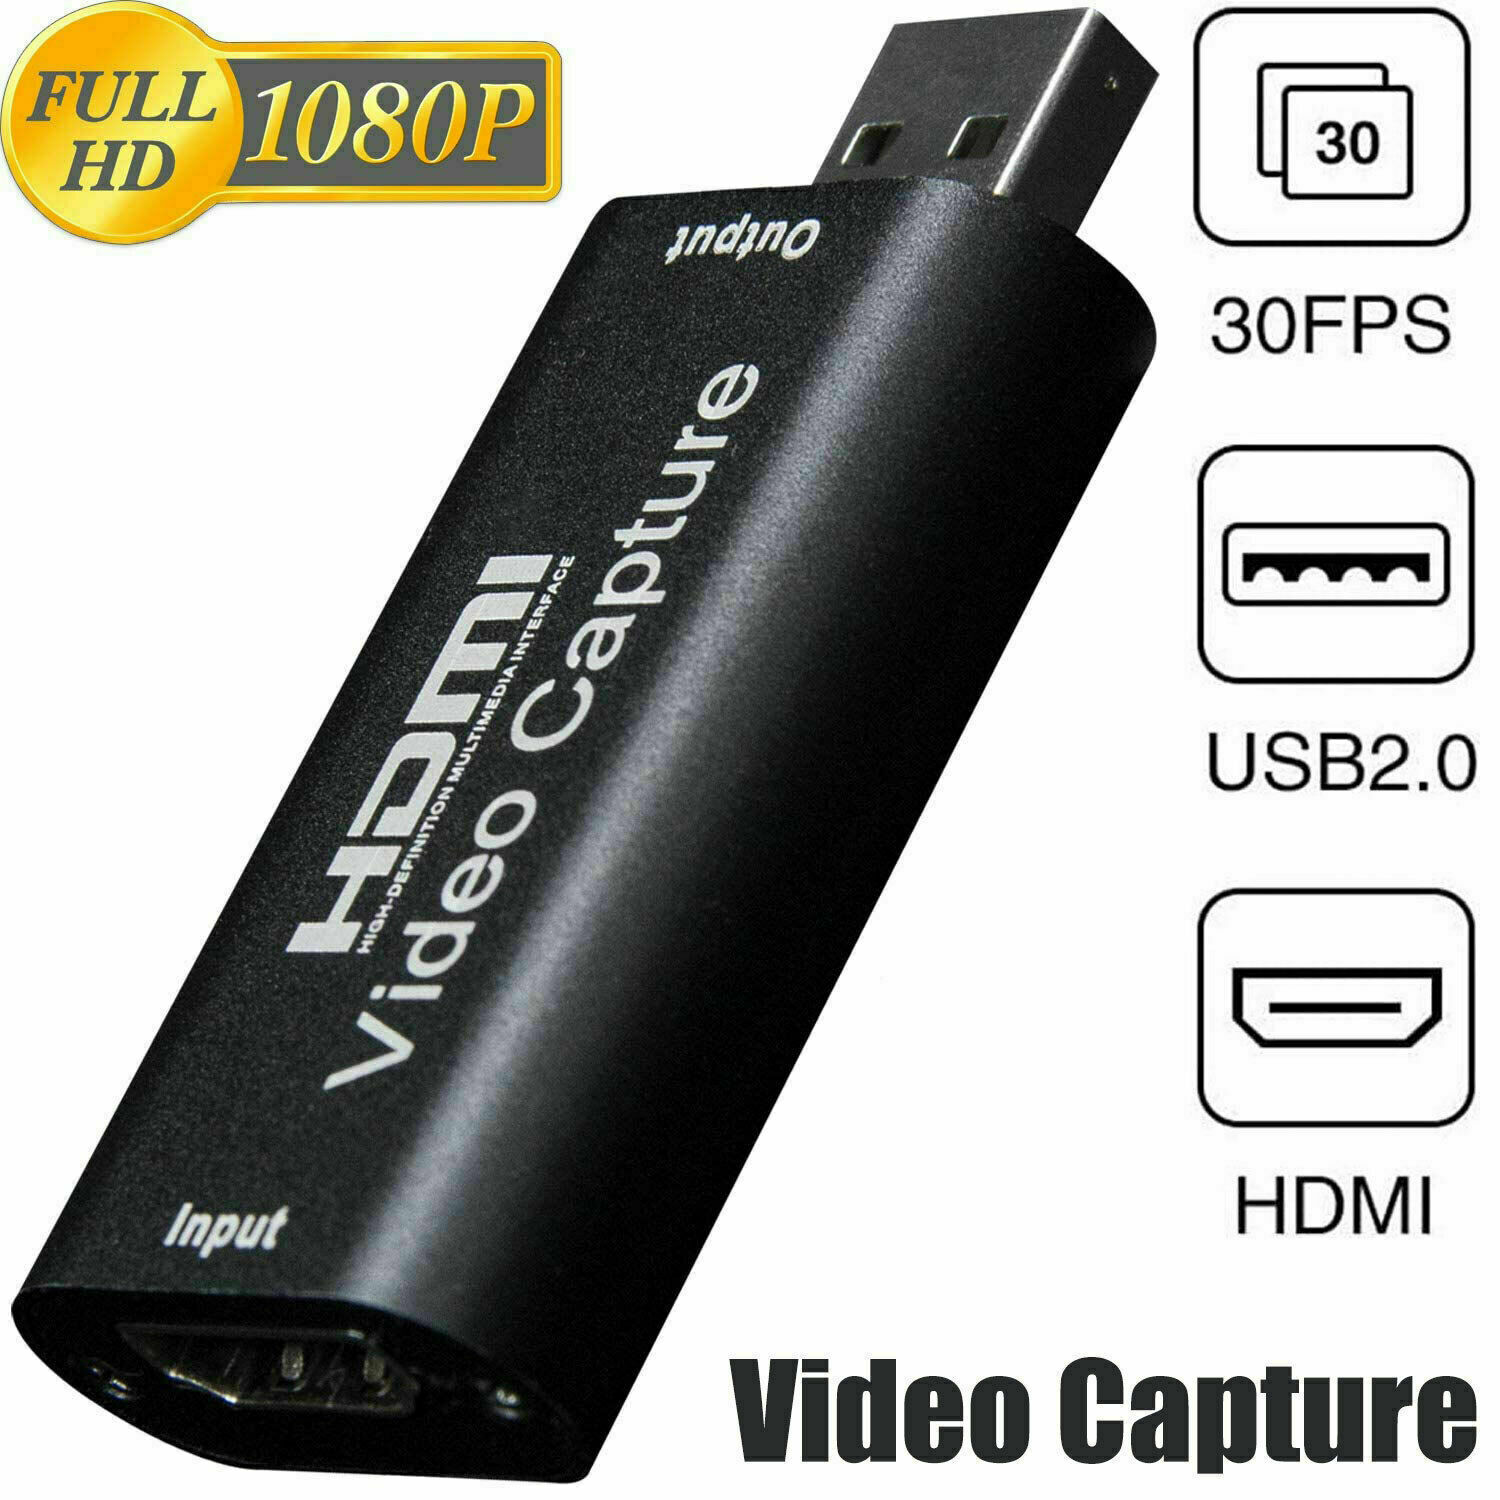 HDMI to USB Video Capture Card 1080P Recorder Phone Game Video Live Streaming US